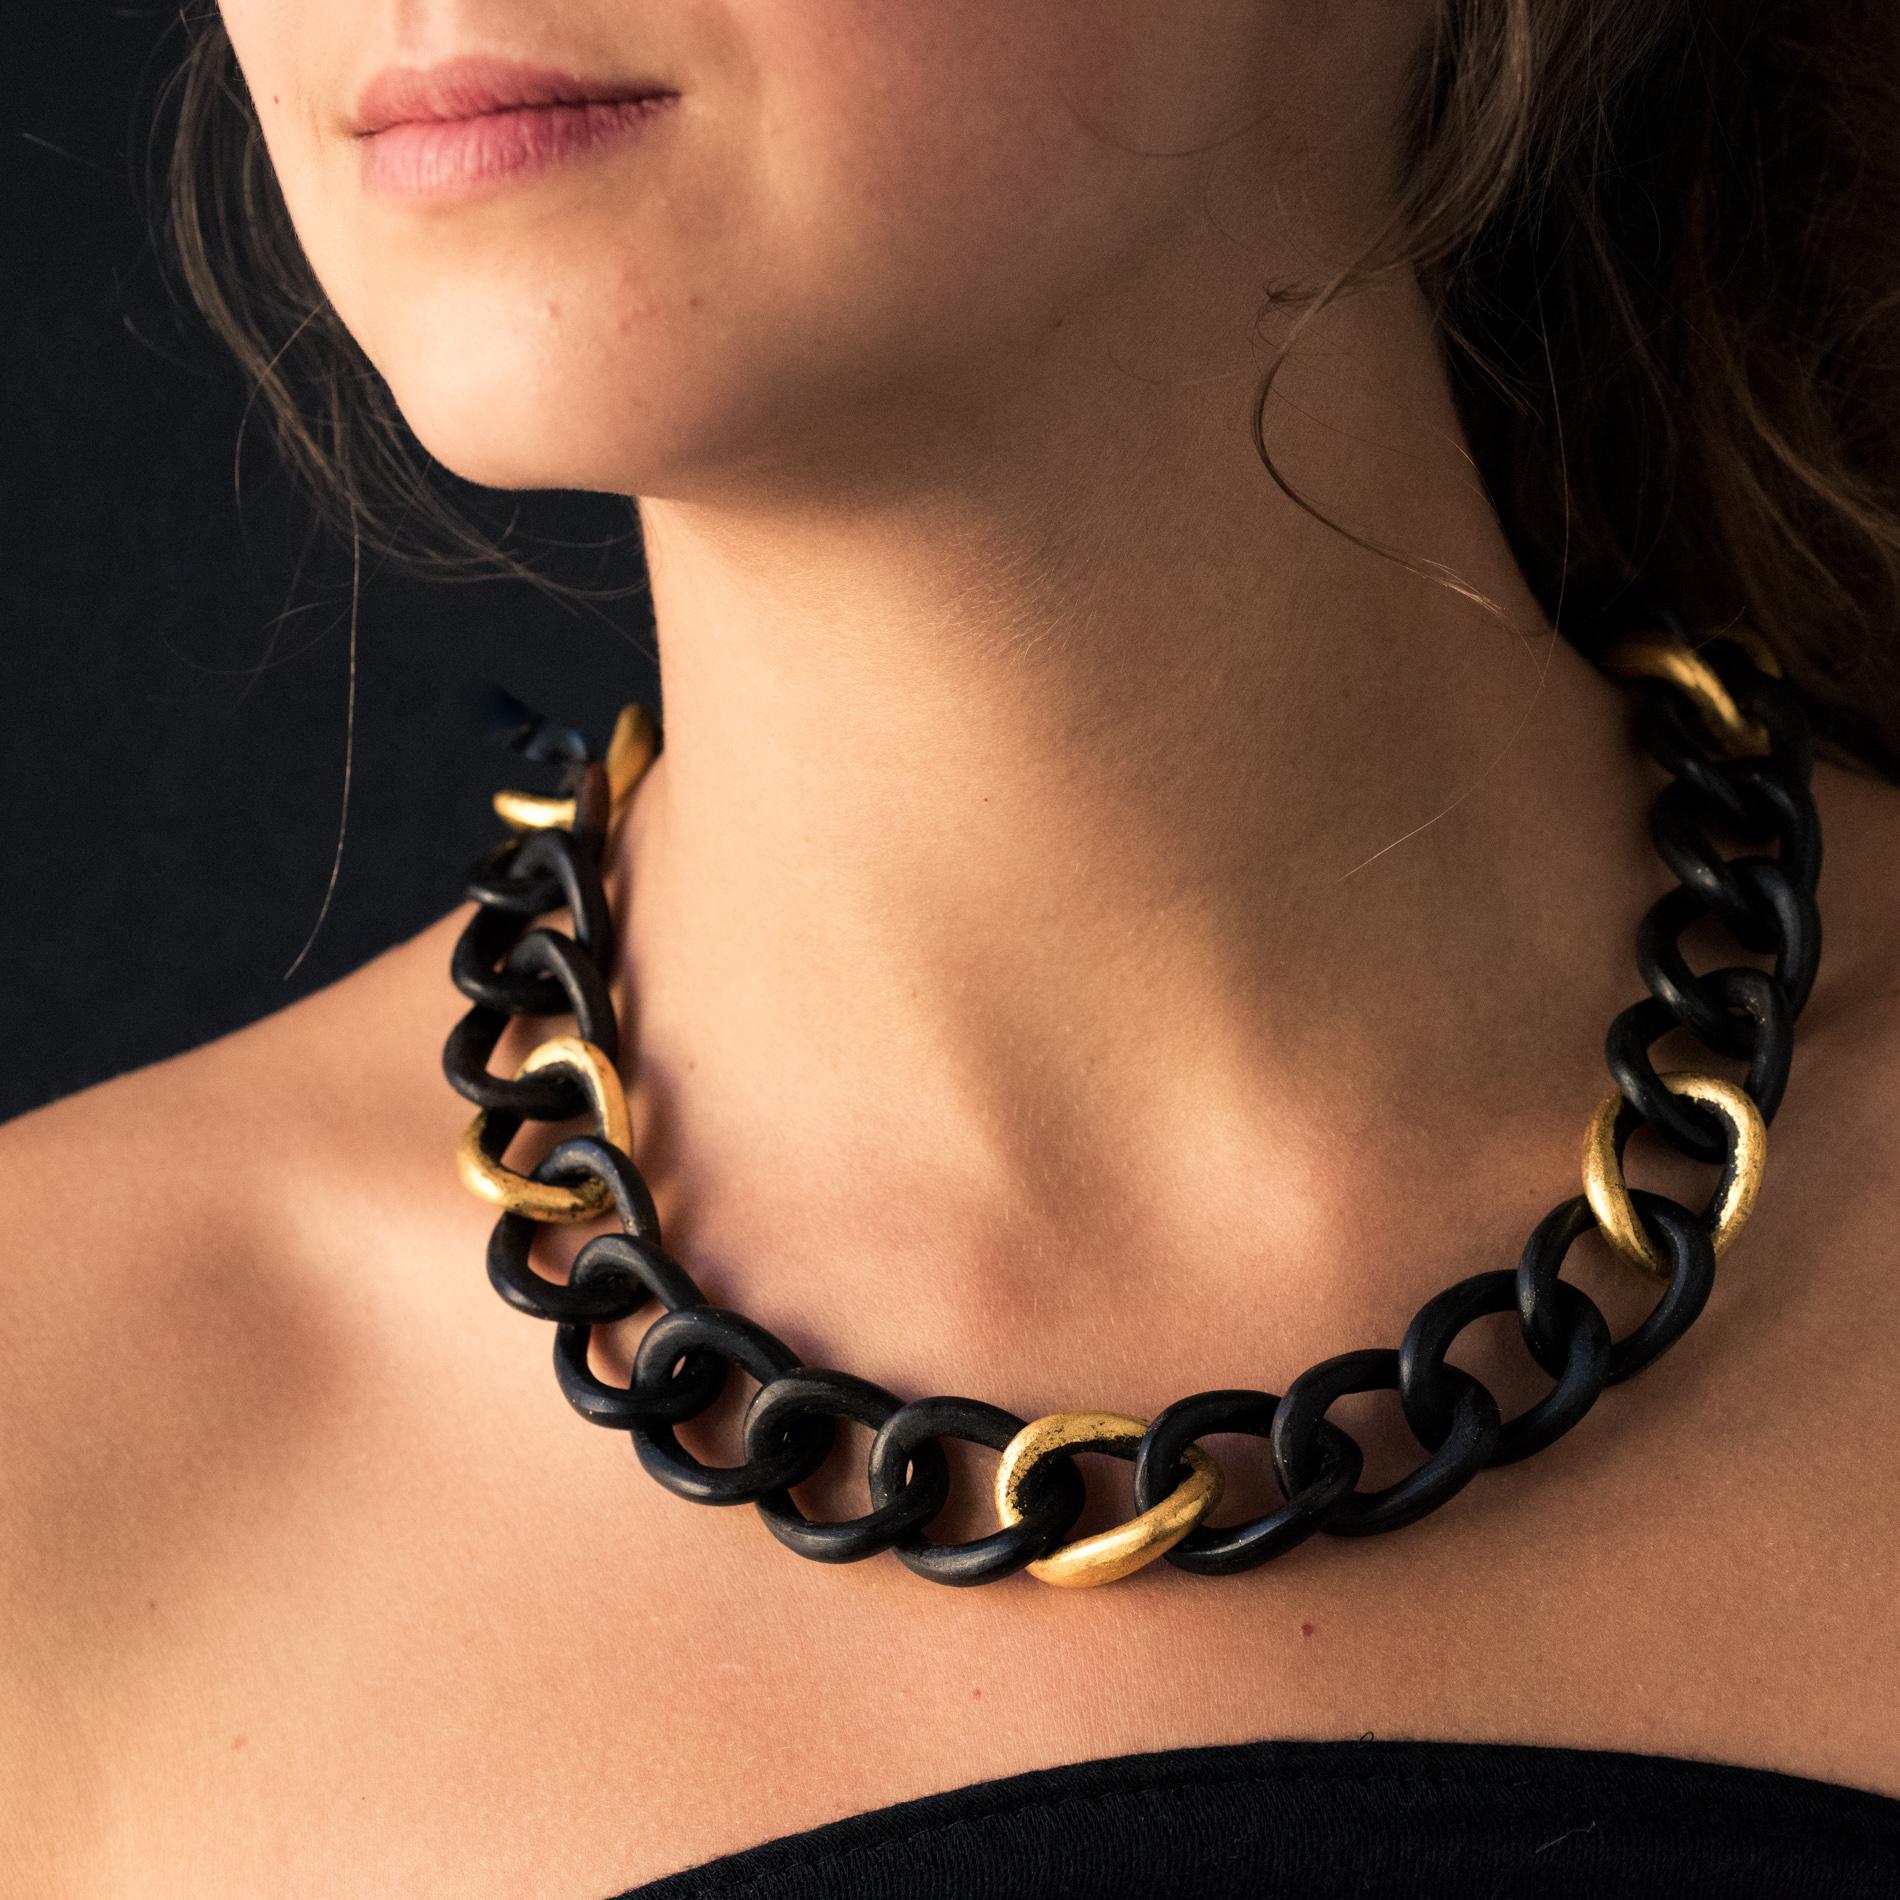 Necklace in ebony.
The mesh of this precious wood necklace is a gourmette link, with 5 links adorned with gold leaf. The clasp is a keyboard.
Length: 52.5 cm, width: about 2 cm, thickness: about 1 cm.
Total weight of the jewel: 42.4 g